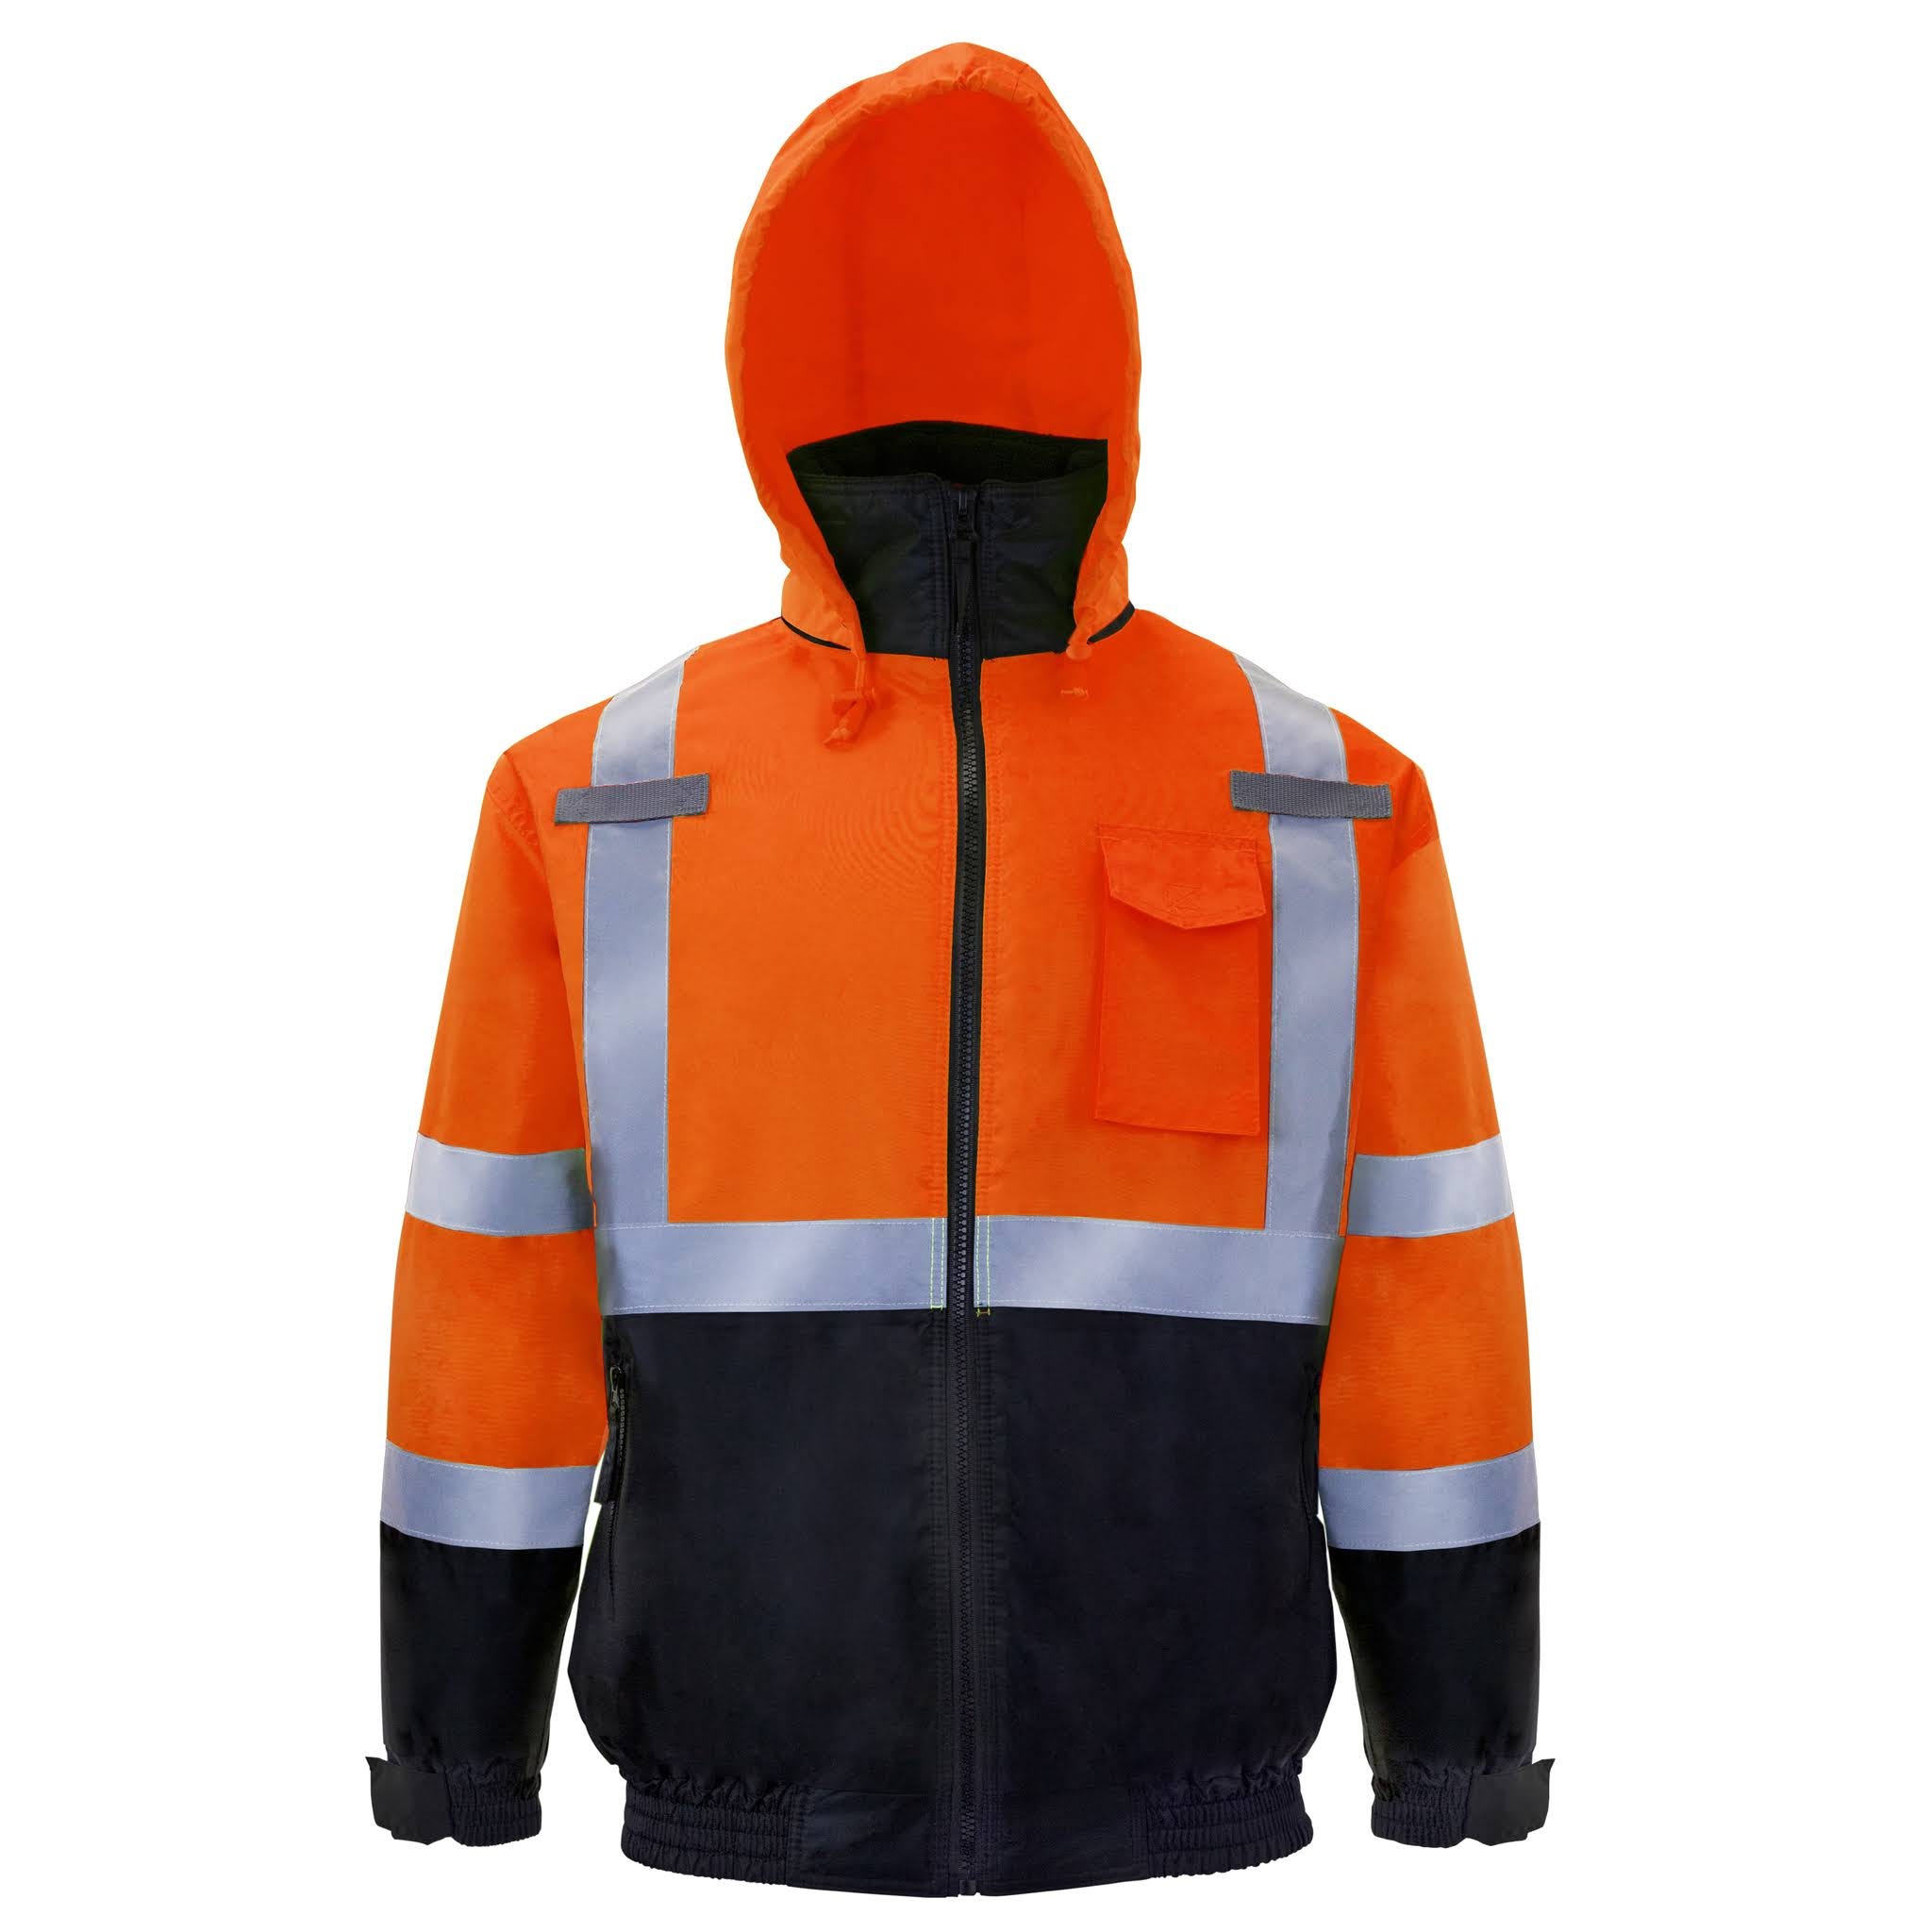 JORESTECH High Visibility Safety Jacket - Water Resistant, ANSI Class 3 Orange | Image